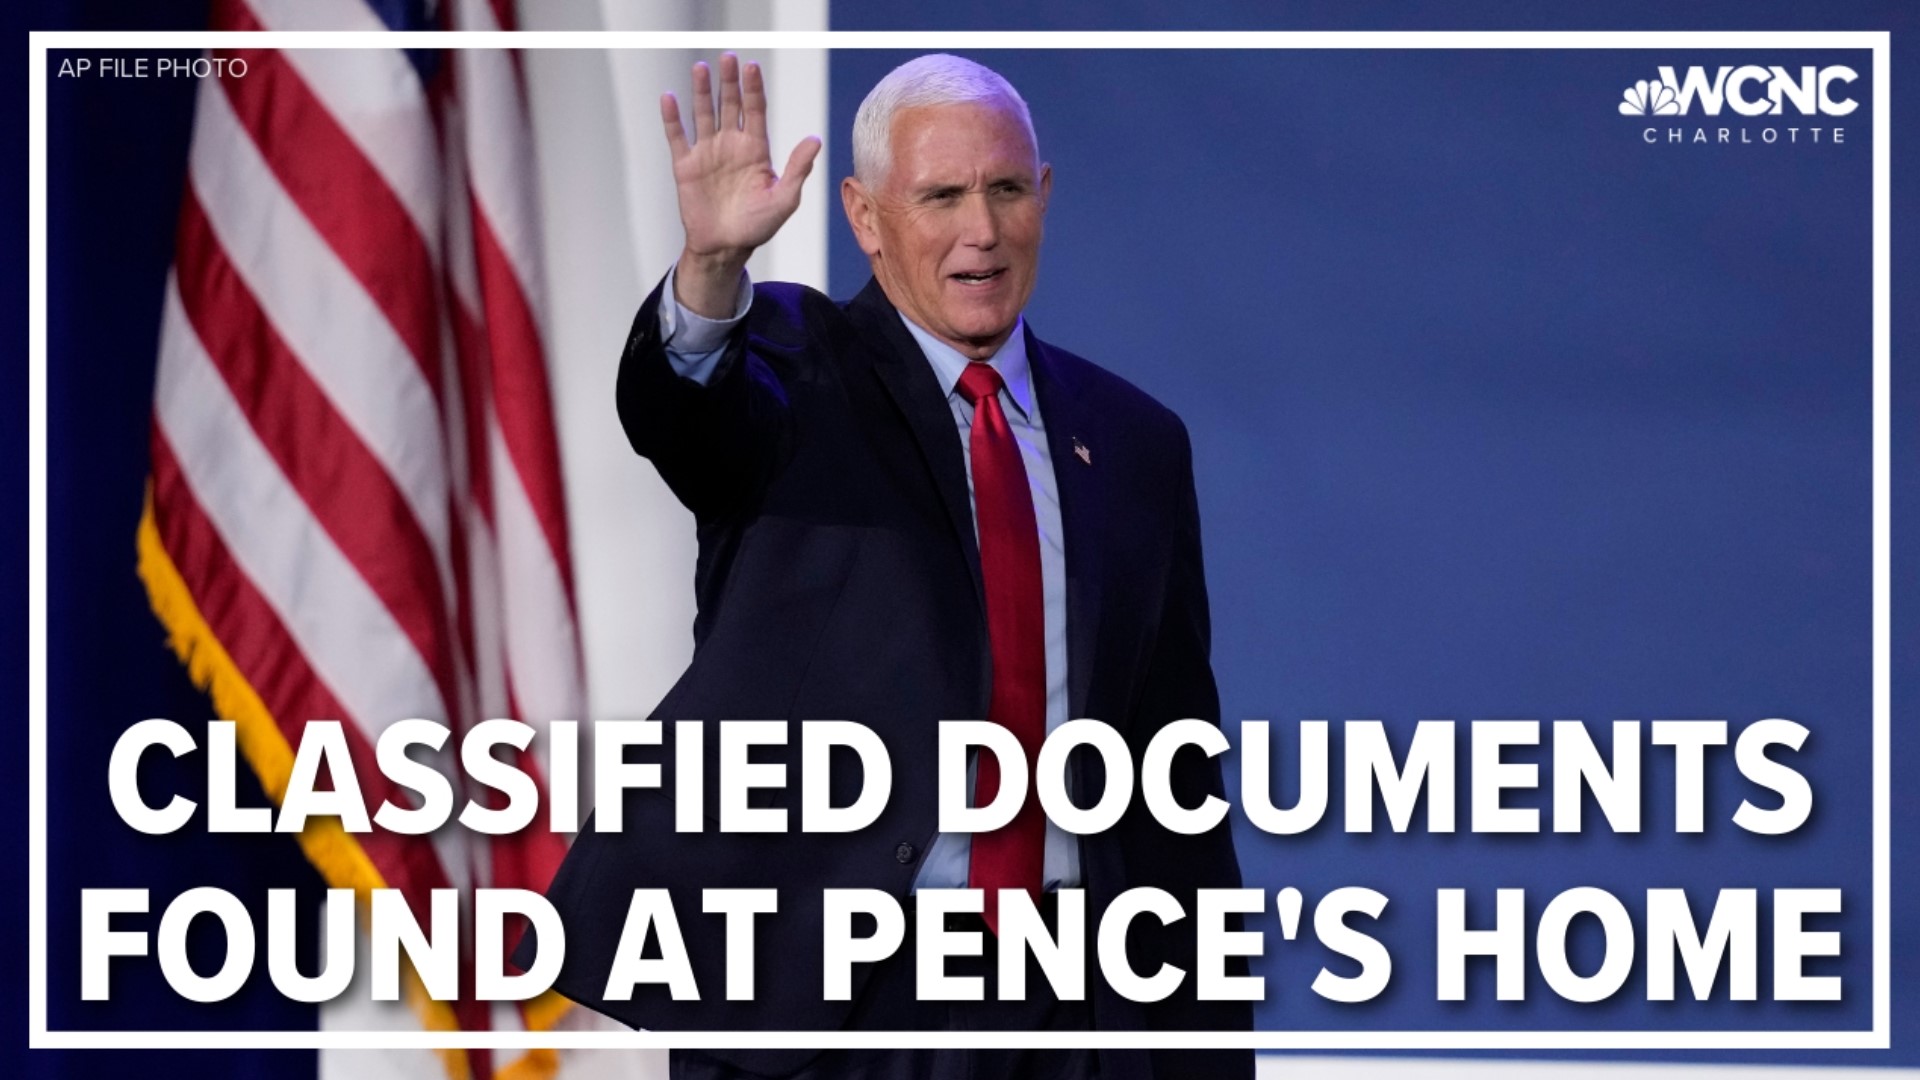 Documents with classified markings were discovered in former Vice President Mike Pence's Indiana Home last week, his lawyer told the National Archives in a letter.